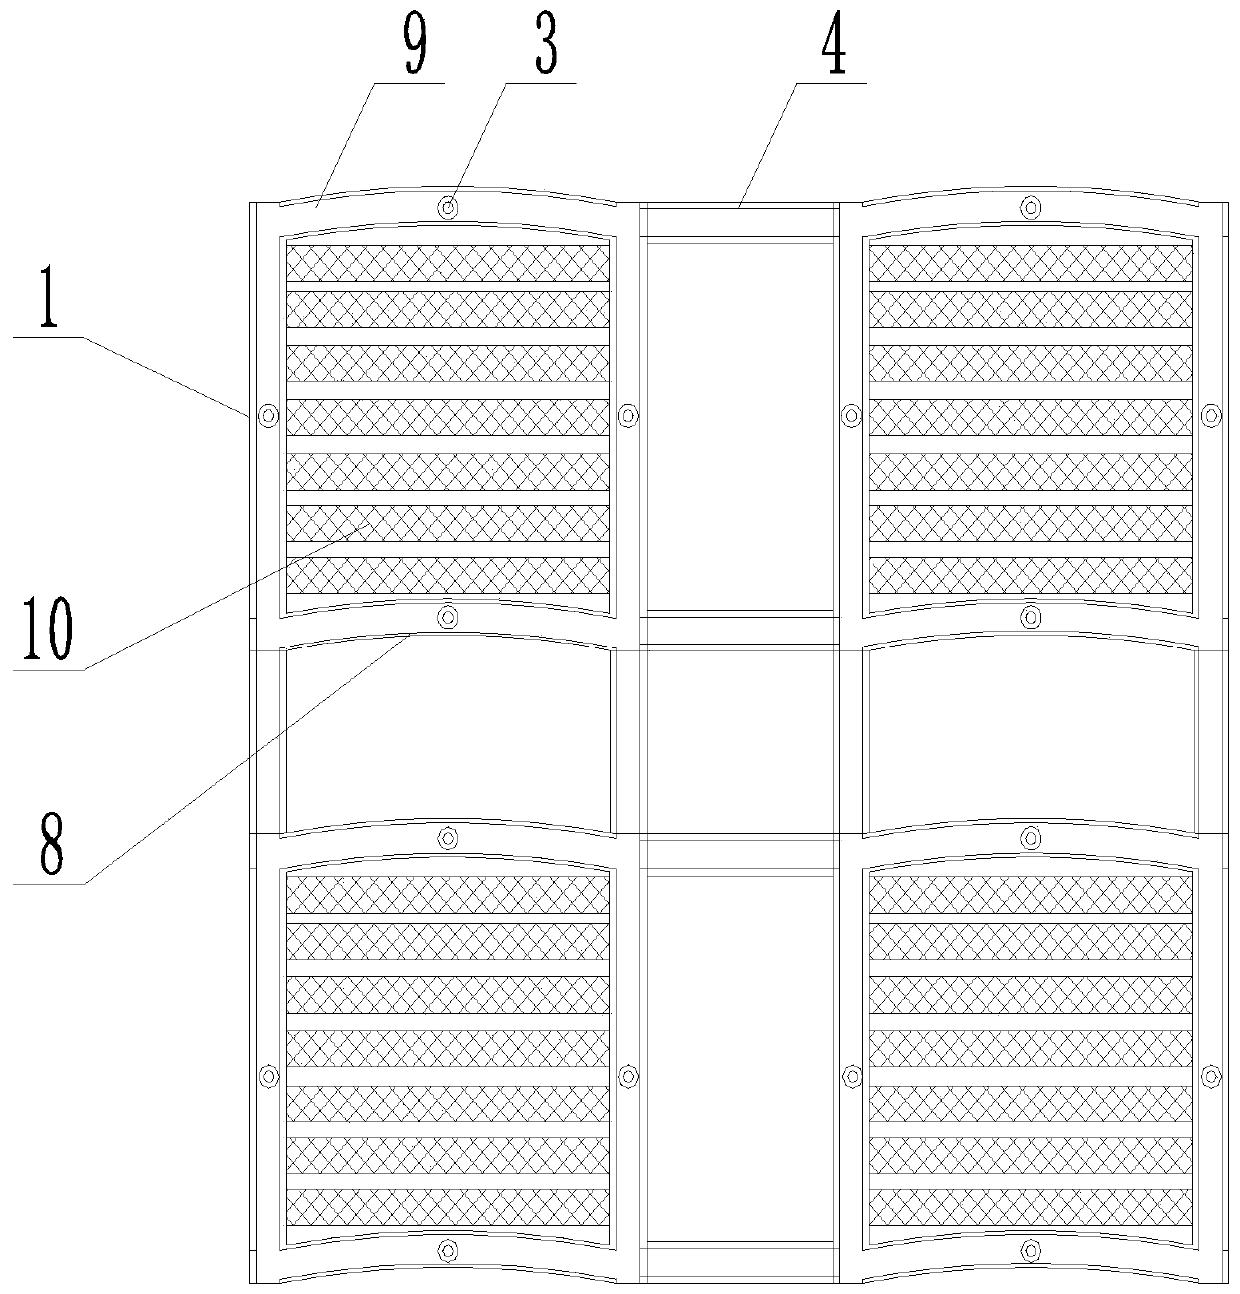 Prefabricated foundation pit slope-protection structure and implementation method